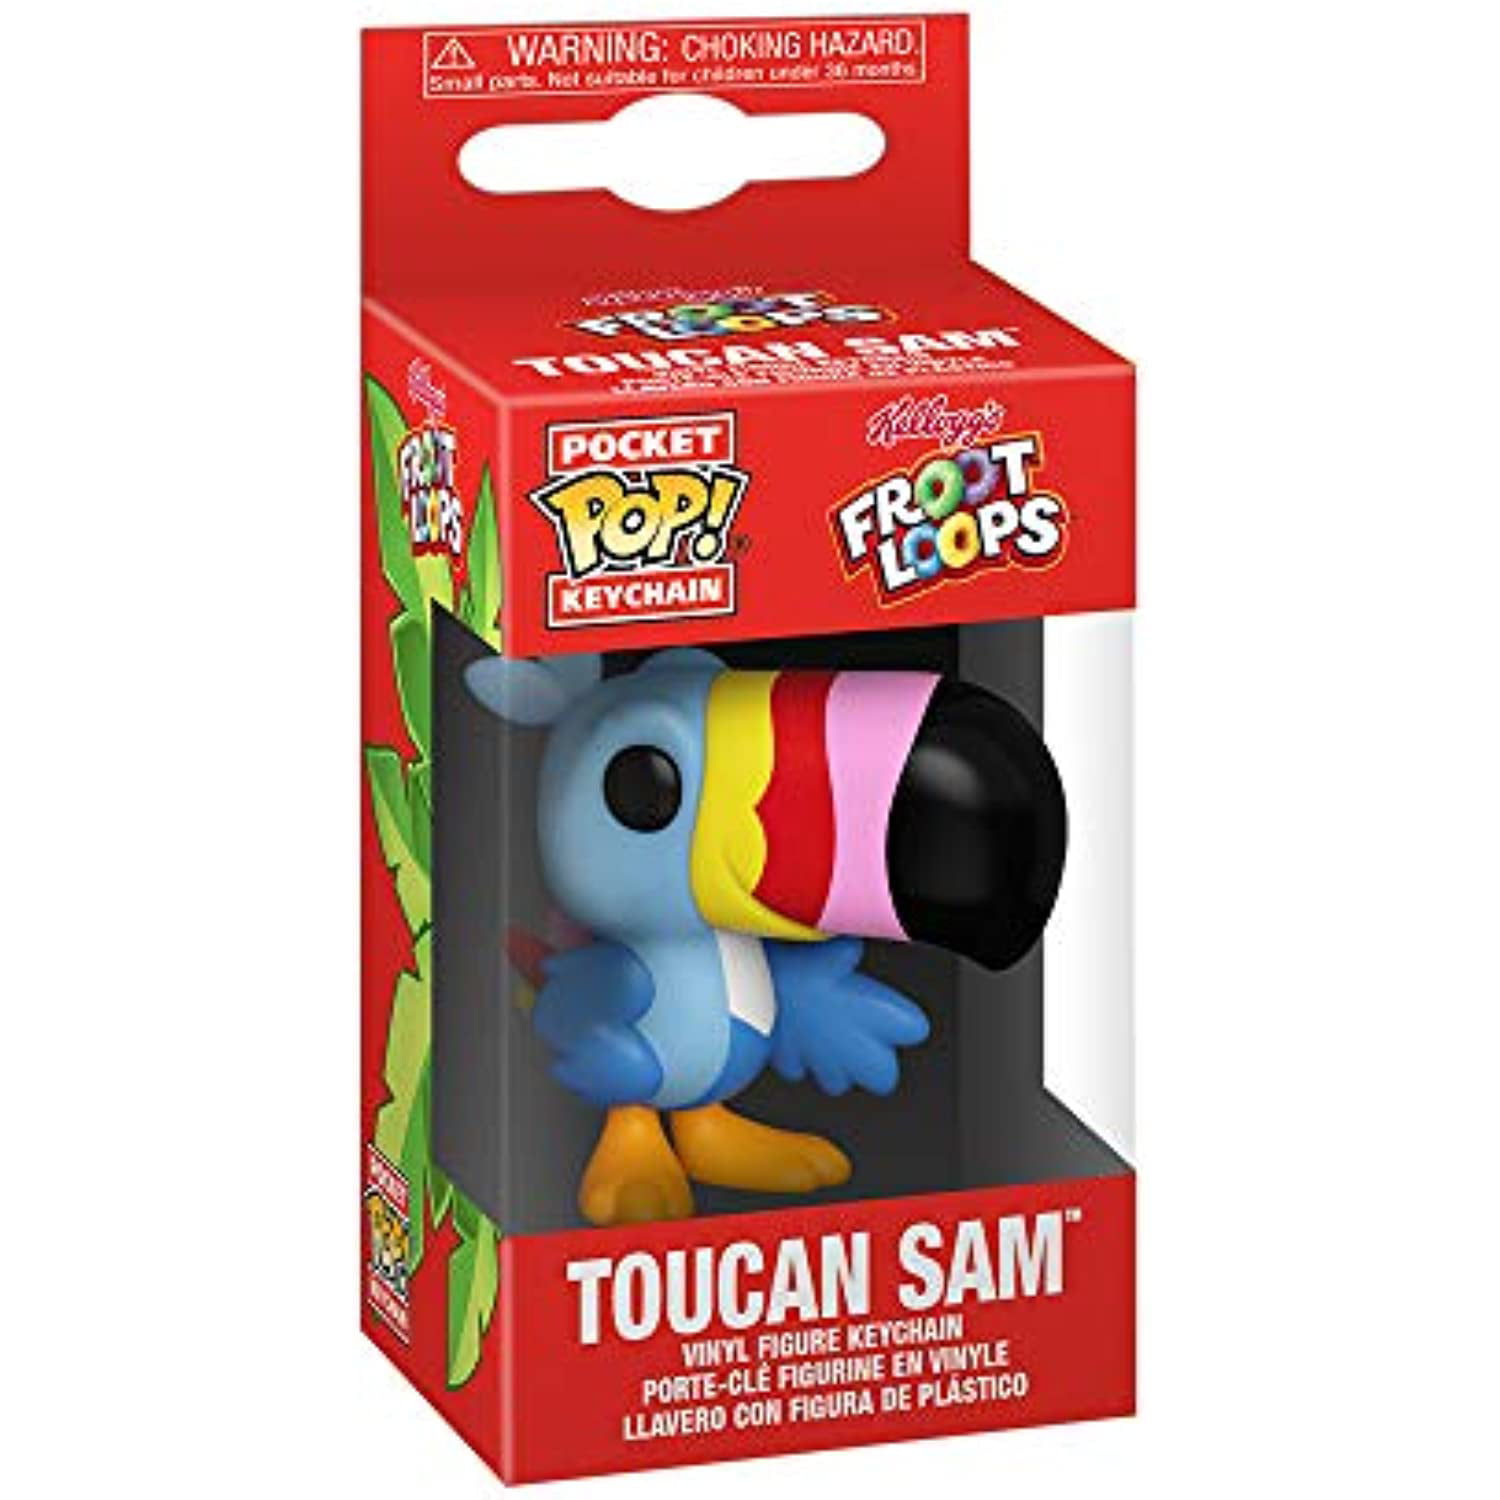 Cereal mascots join Funko's range of Pocket Pop! Key Chains –